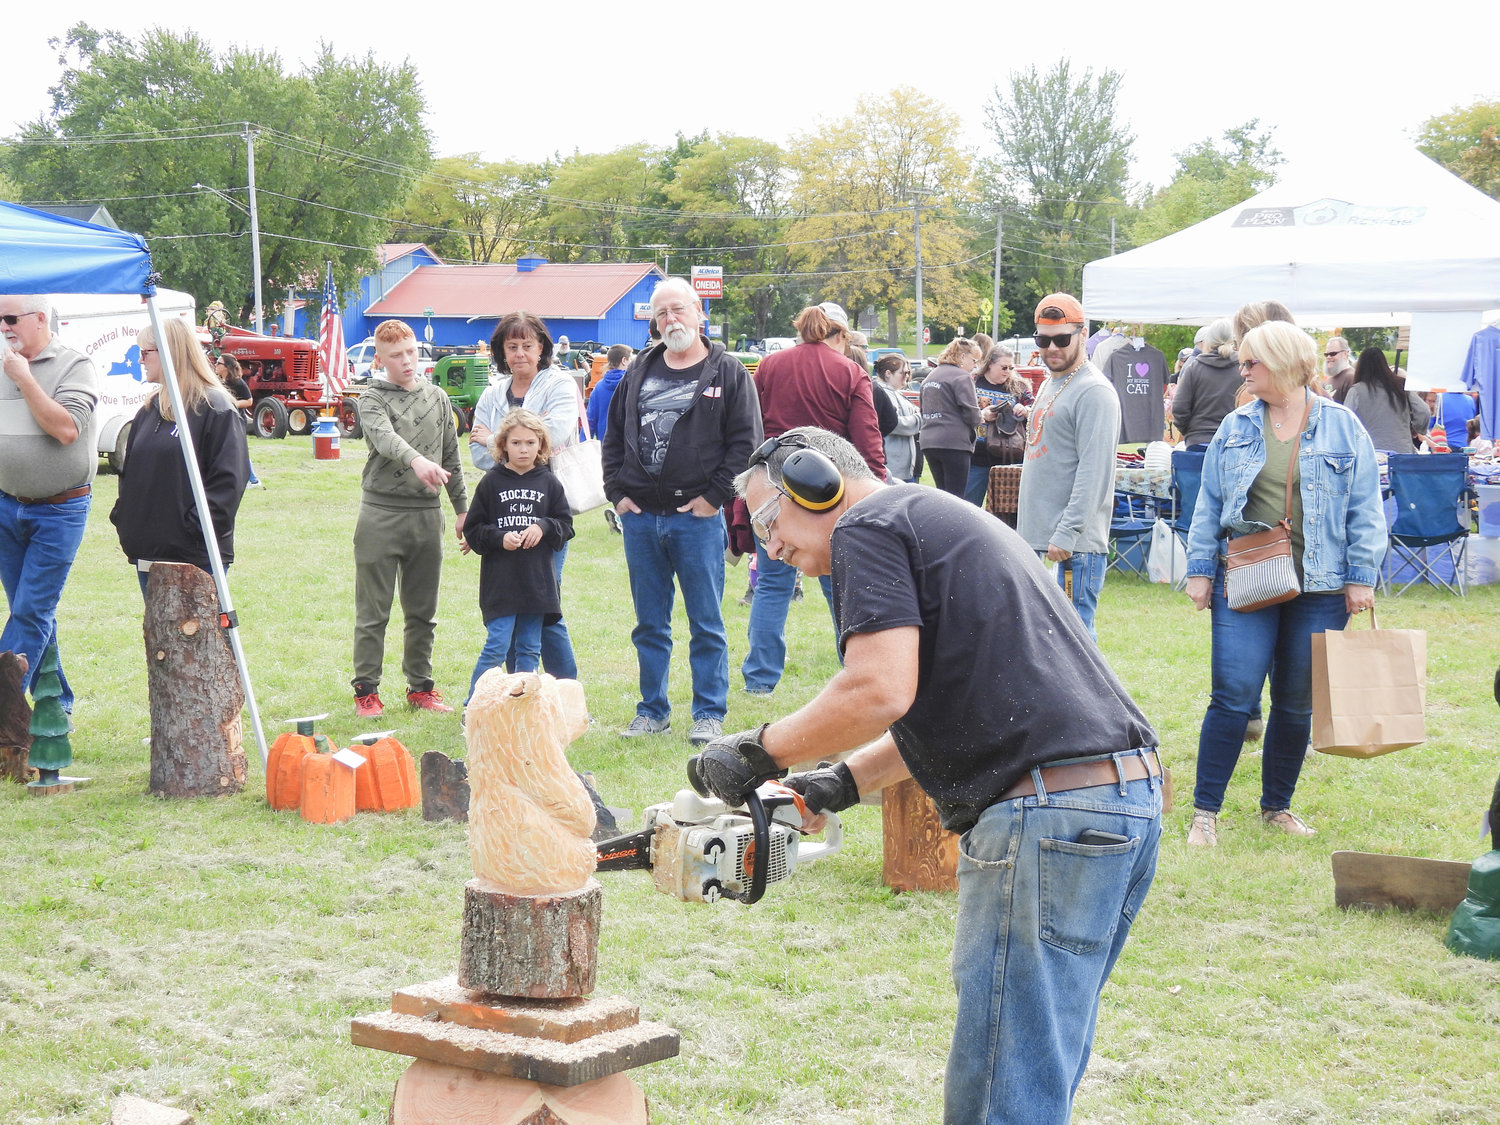 Oneida resident George Meyers uses his chainsaw to carve sculptures live at the second annual Oneida Fall Fest on Saturday, Oct. 1.